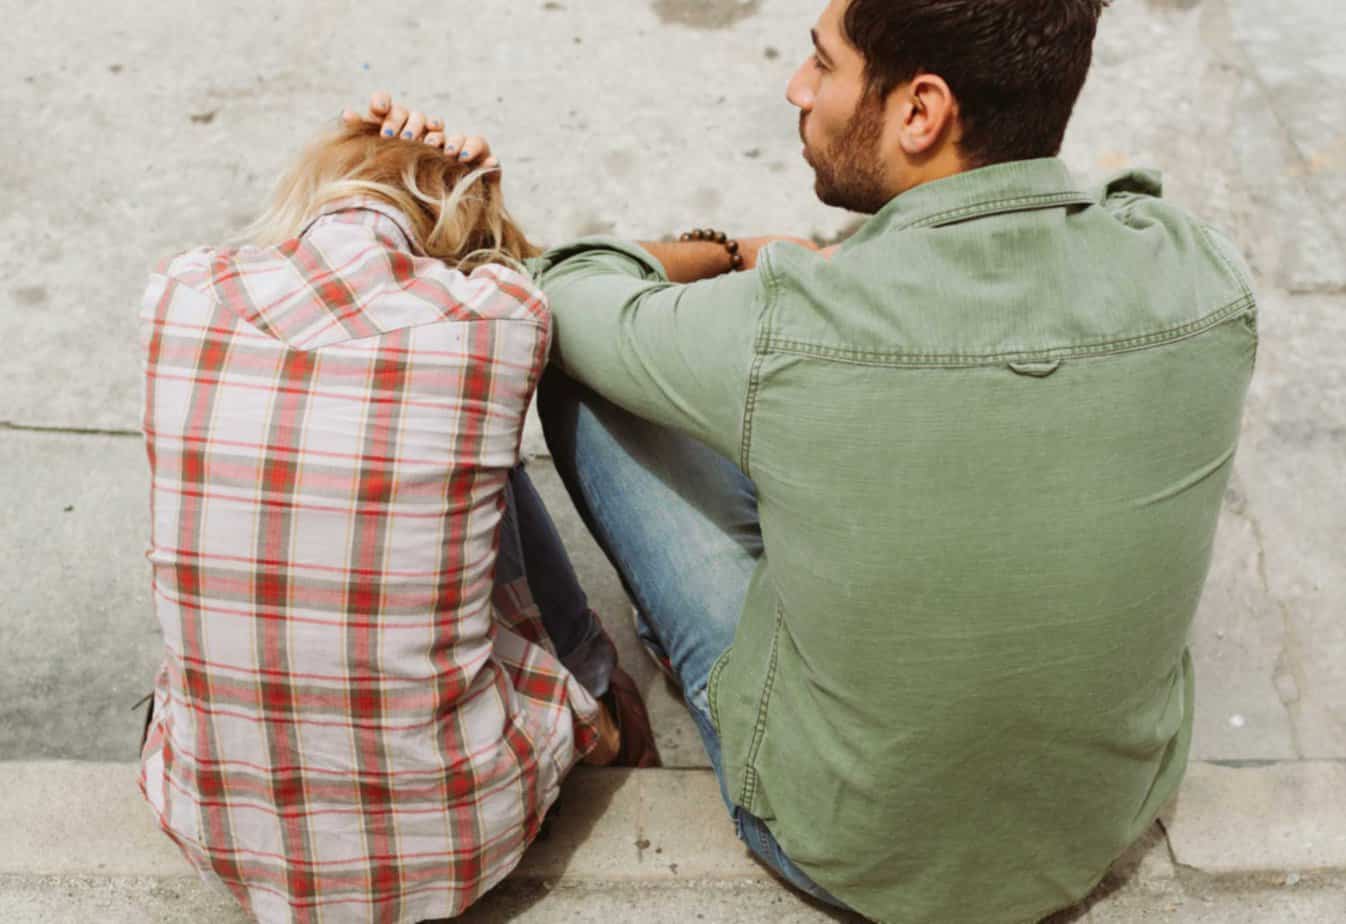 frustrated woman in flannel with head in arms on outside stoop next to man in green jacket